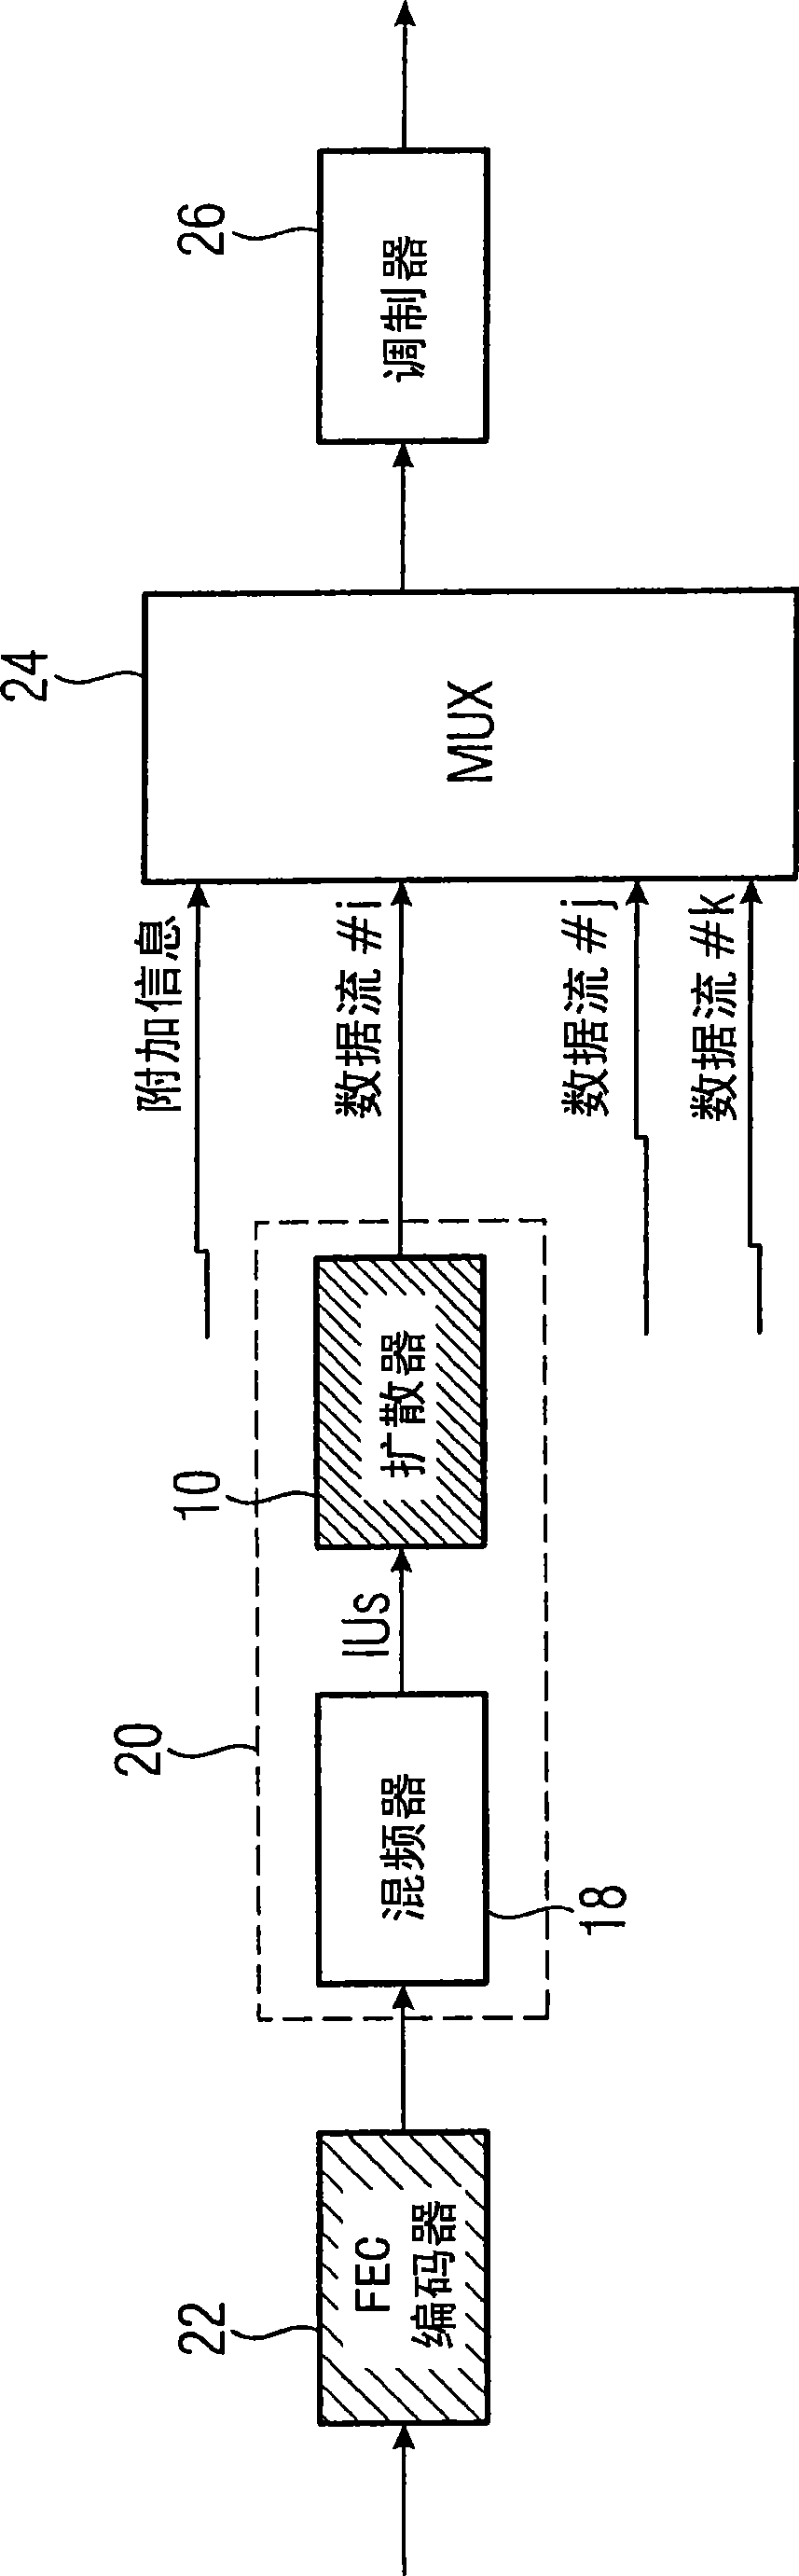 Interleaver apparatus and receiver for a signal produced by the interleaver apparatus